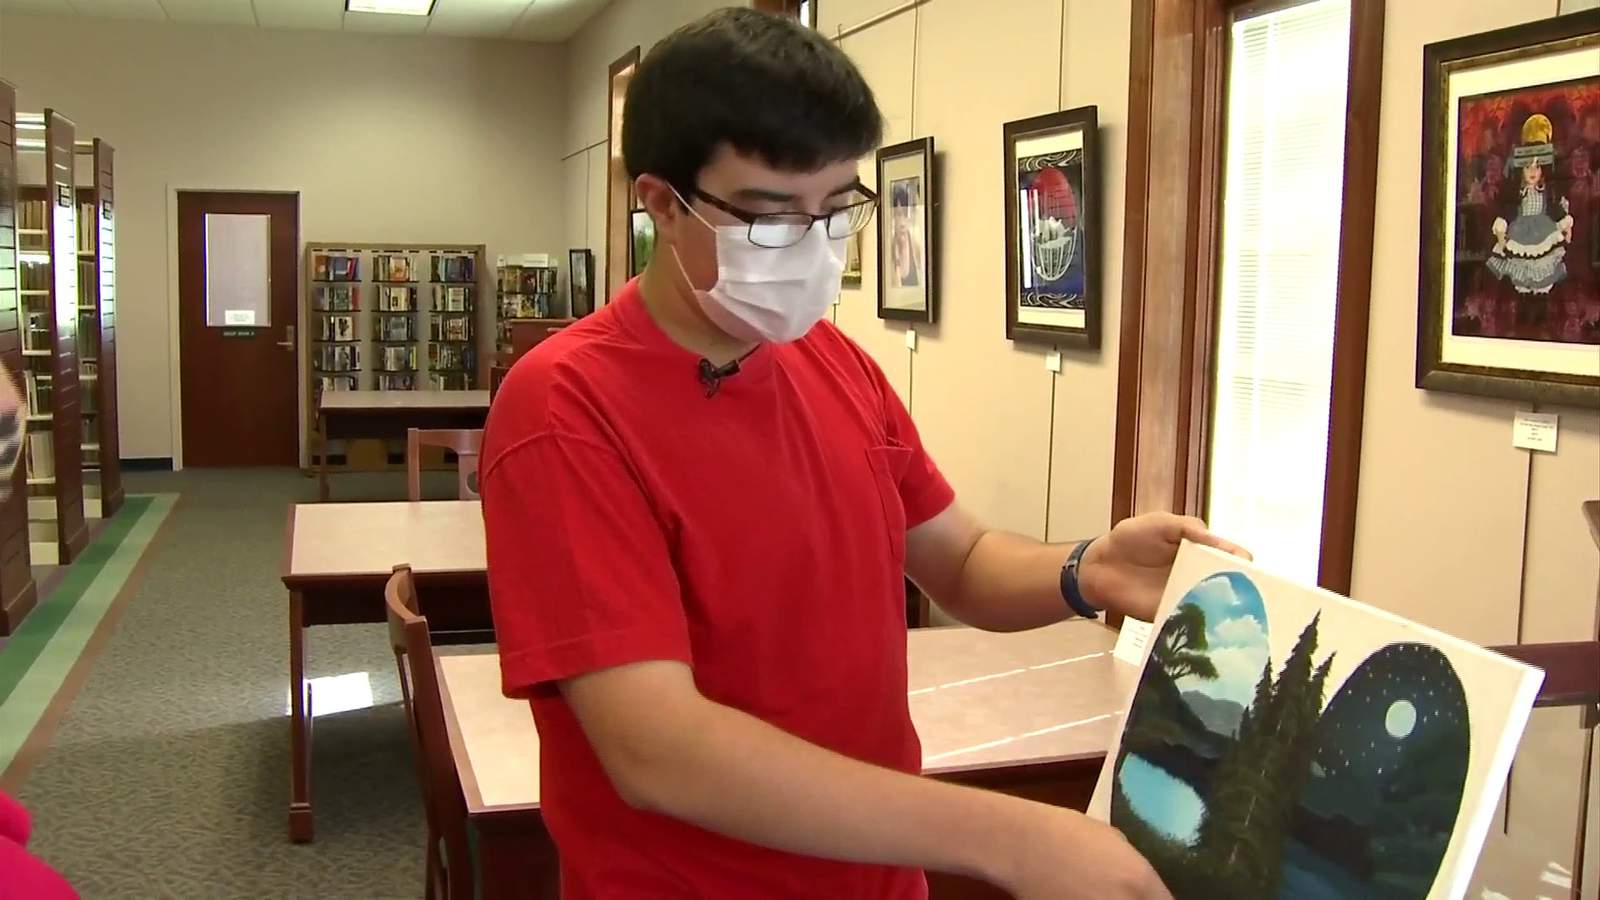 Happy little hobby: Bedford County teen learns to paint watching Bob Ross